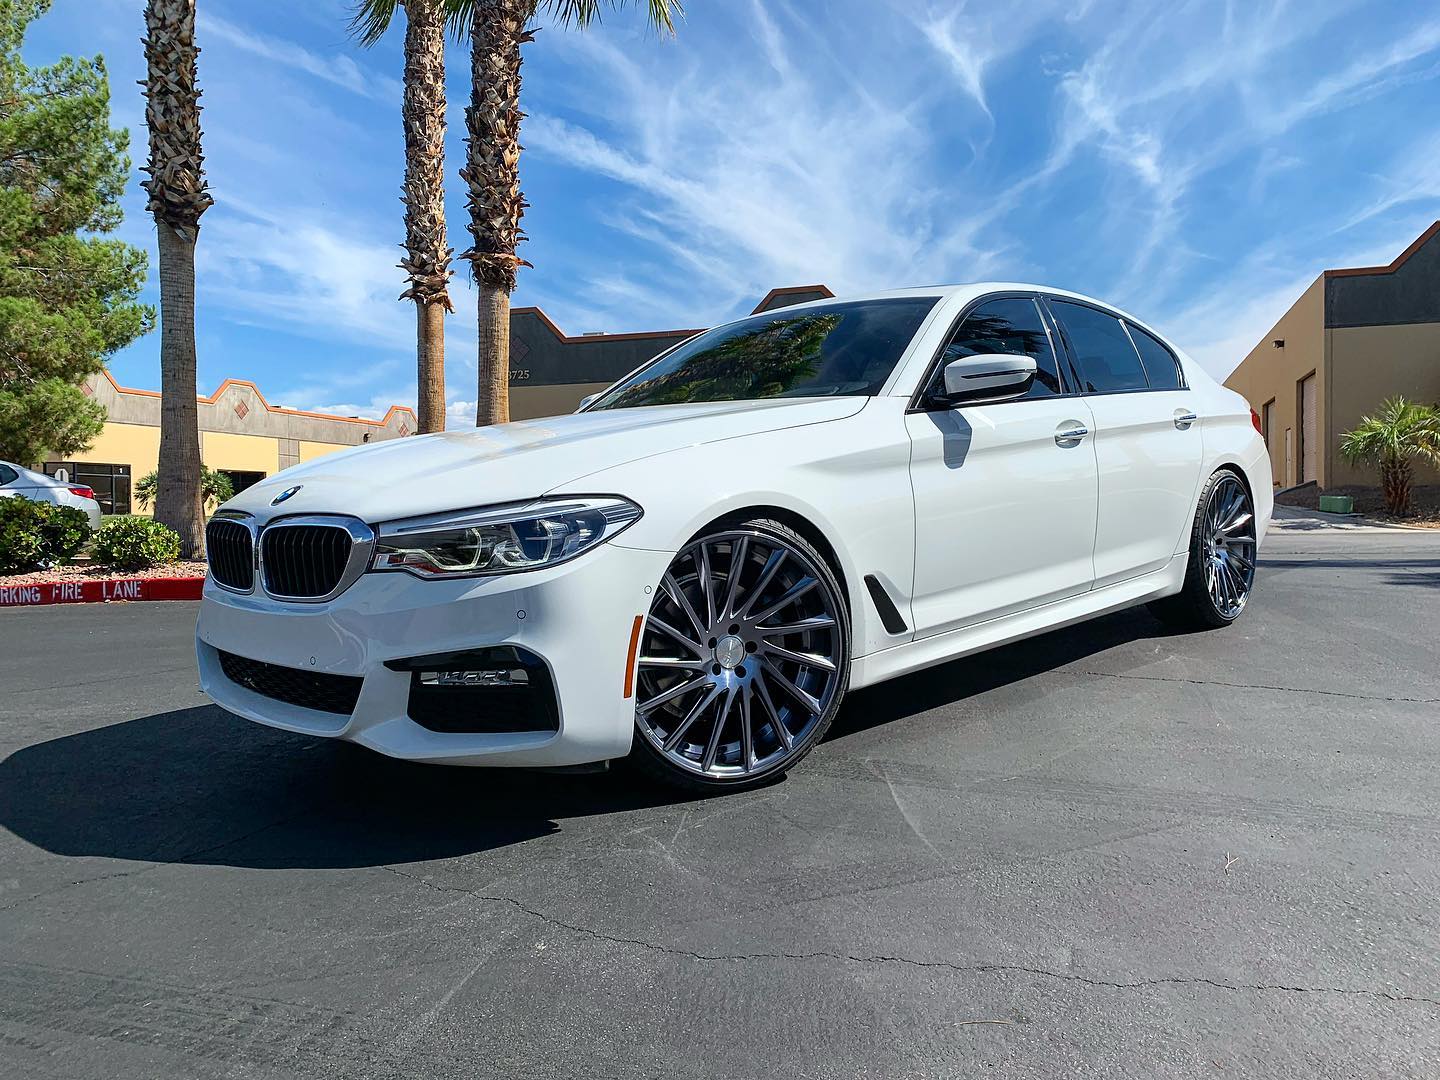 BMW 5 Series G30 with 22×9 and 22×10.5-inch Road Force RF16